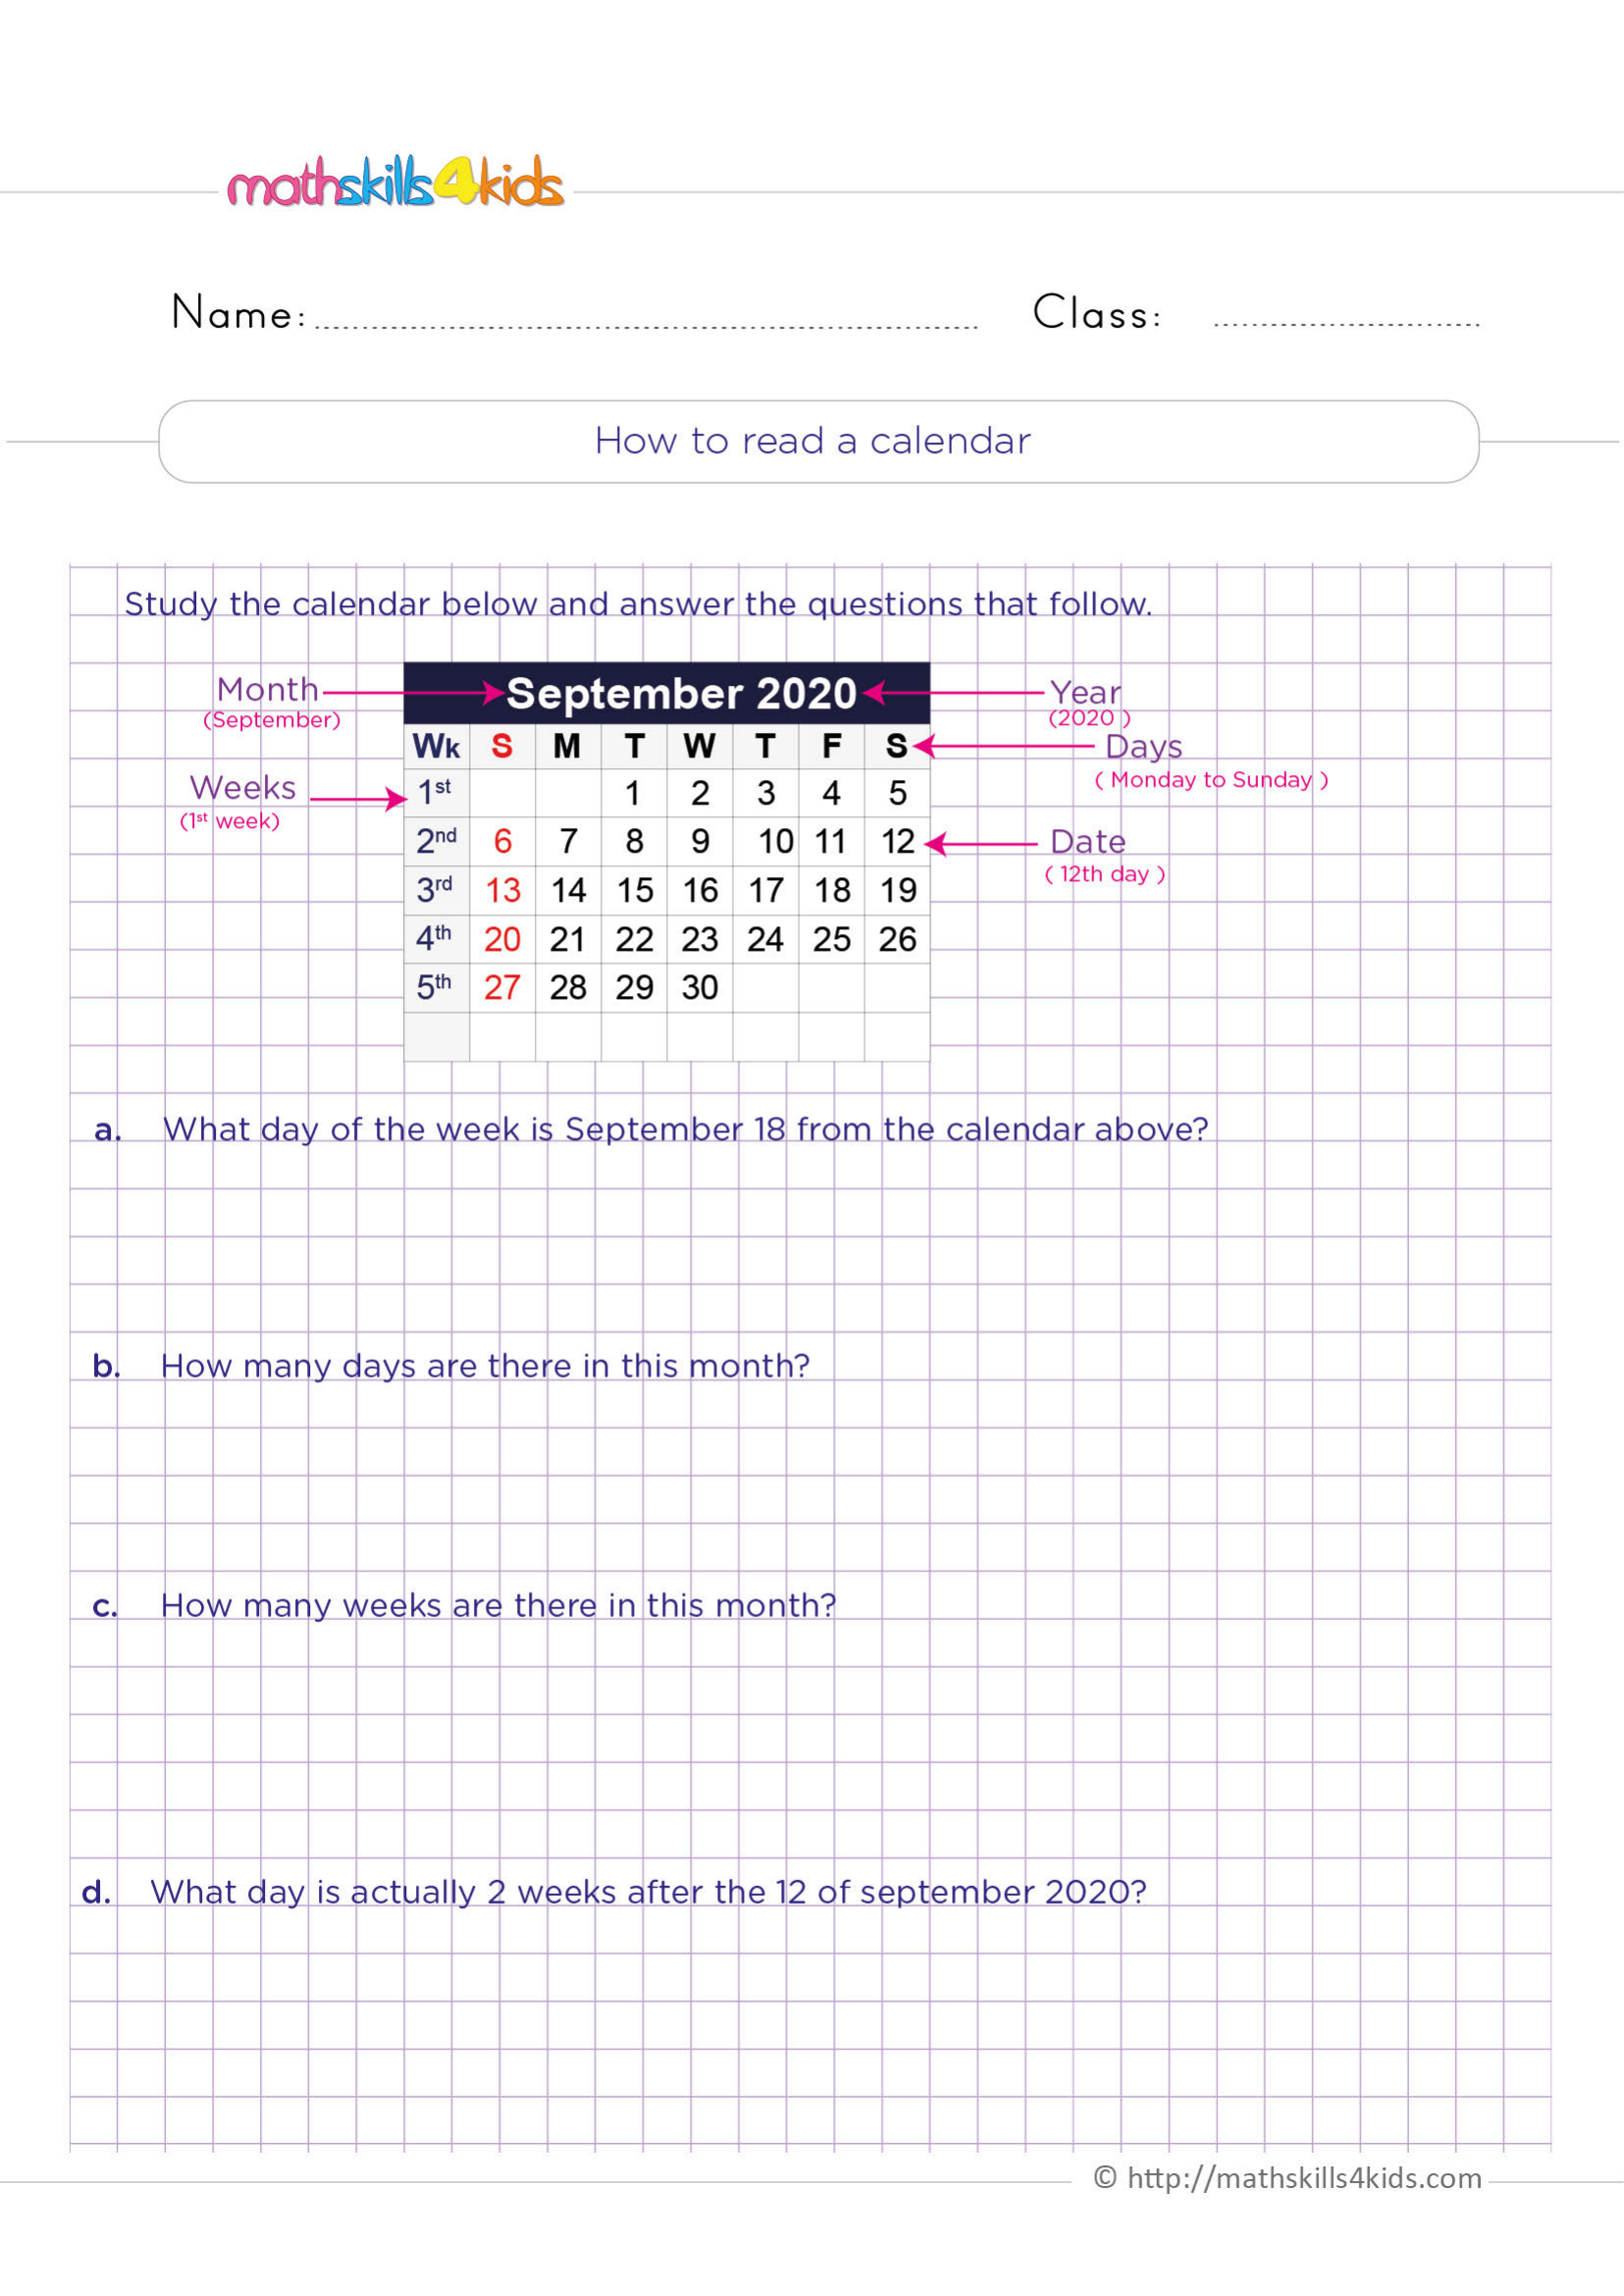 How to read a calendar Worksheet Zone